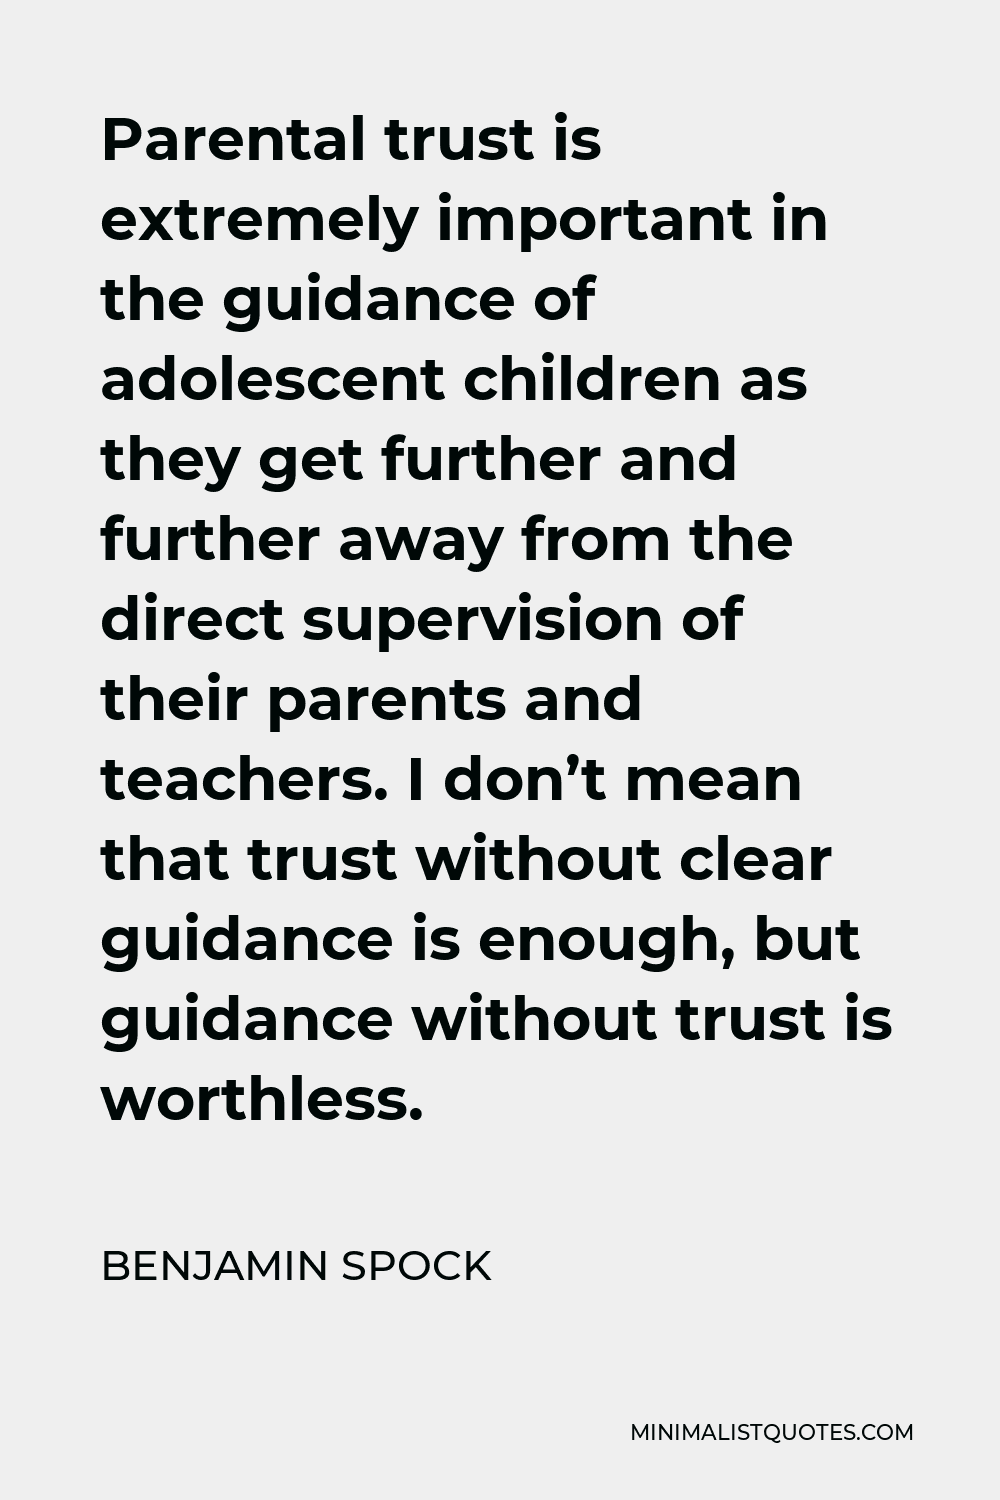 Benjamin Spock Quote - Parental trust is extremely important in the guidance of adolescent children as they get further and further away from the direct supervision of their parents and teachers. I don’t mean that trust without clear guidance is enough, but guidance without trust is worthless.